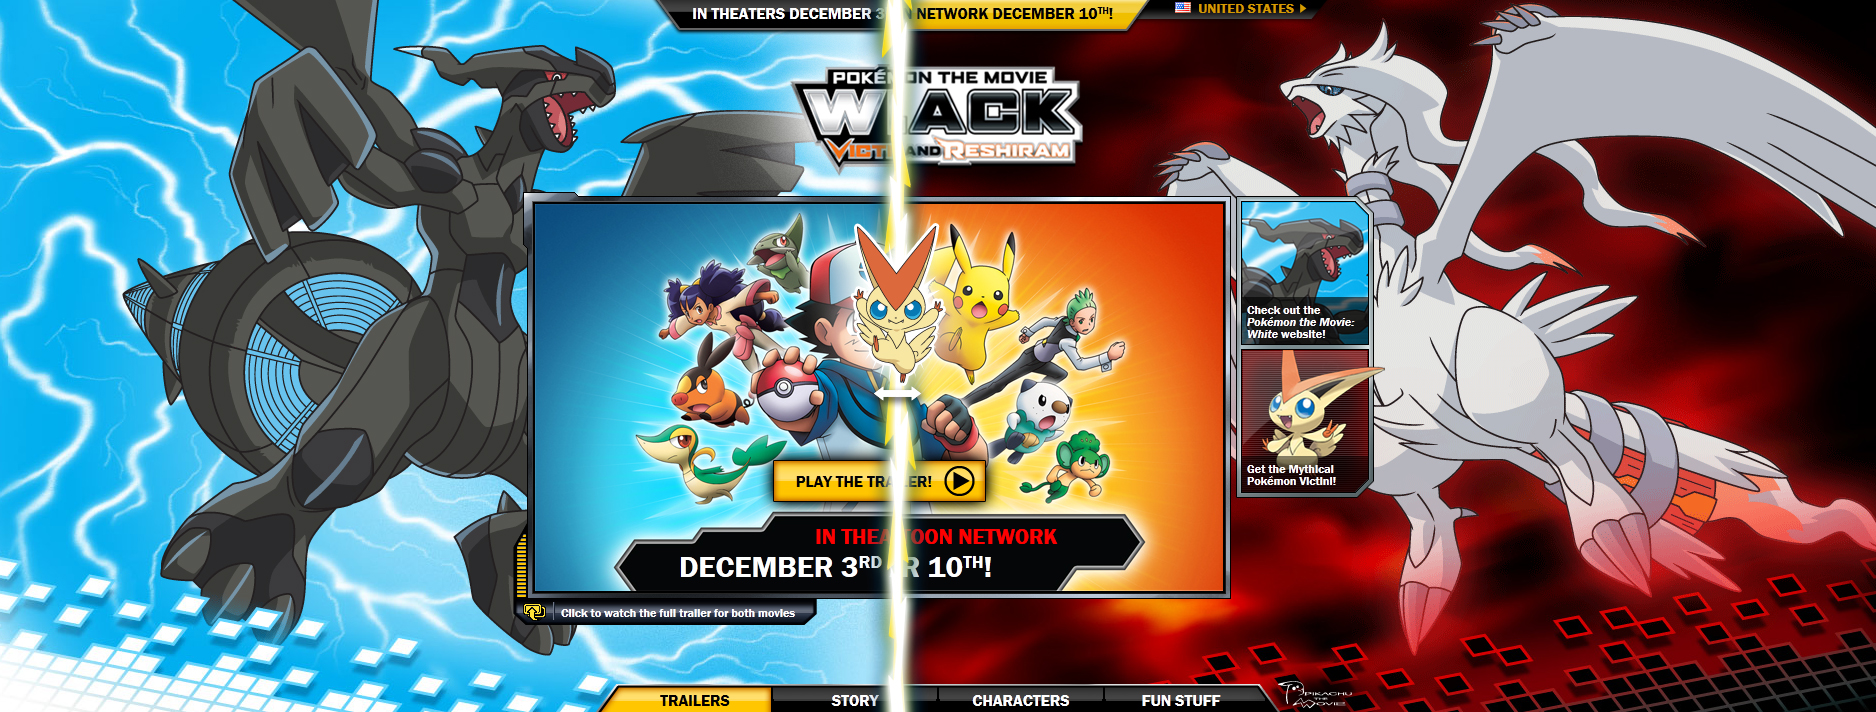 Differences Between Victini and the Black Hero, Zekrom & Victini